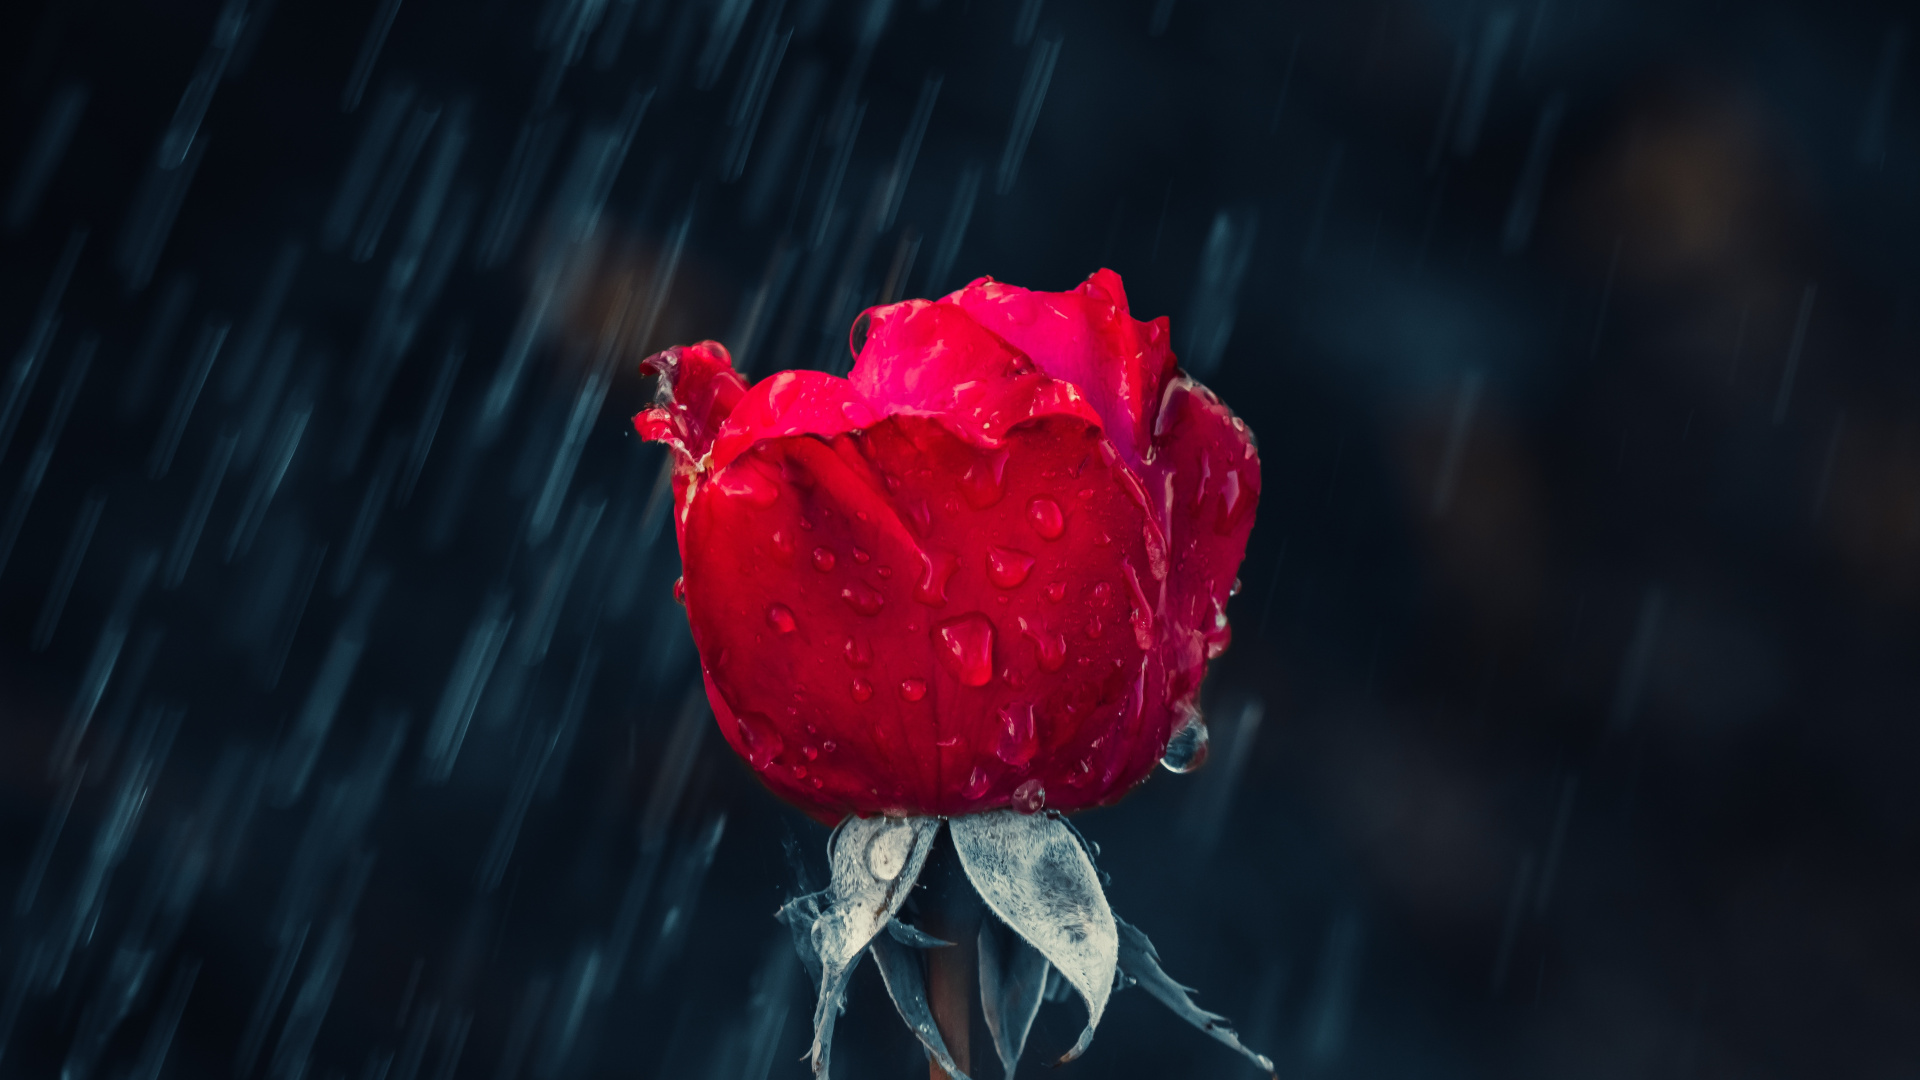 Downalod [1920x1080] - Red Roses In Rain , HD Wallpaper & Backgrounds